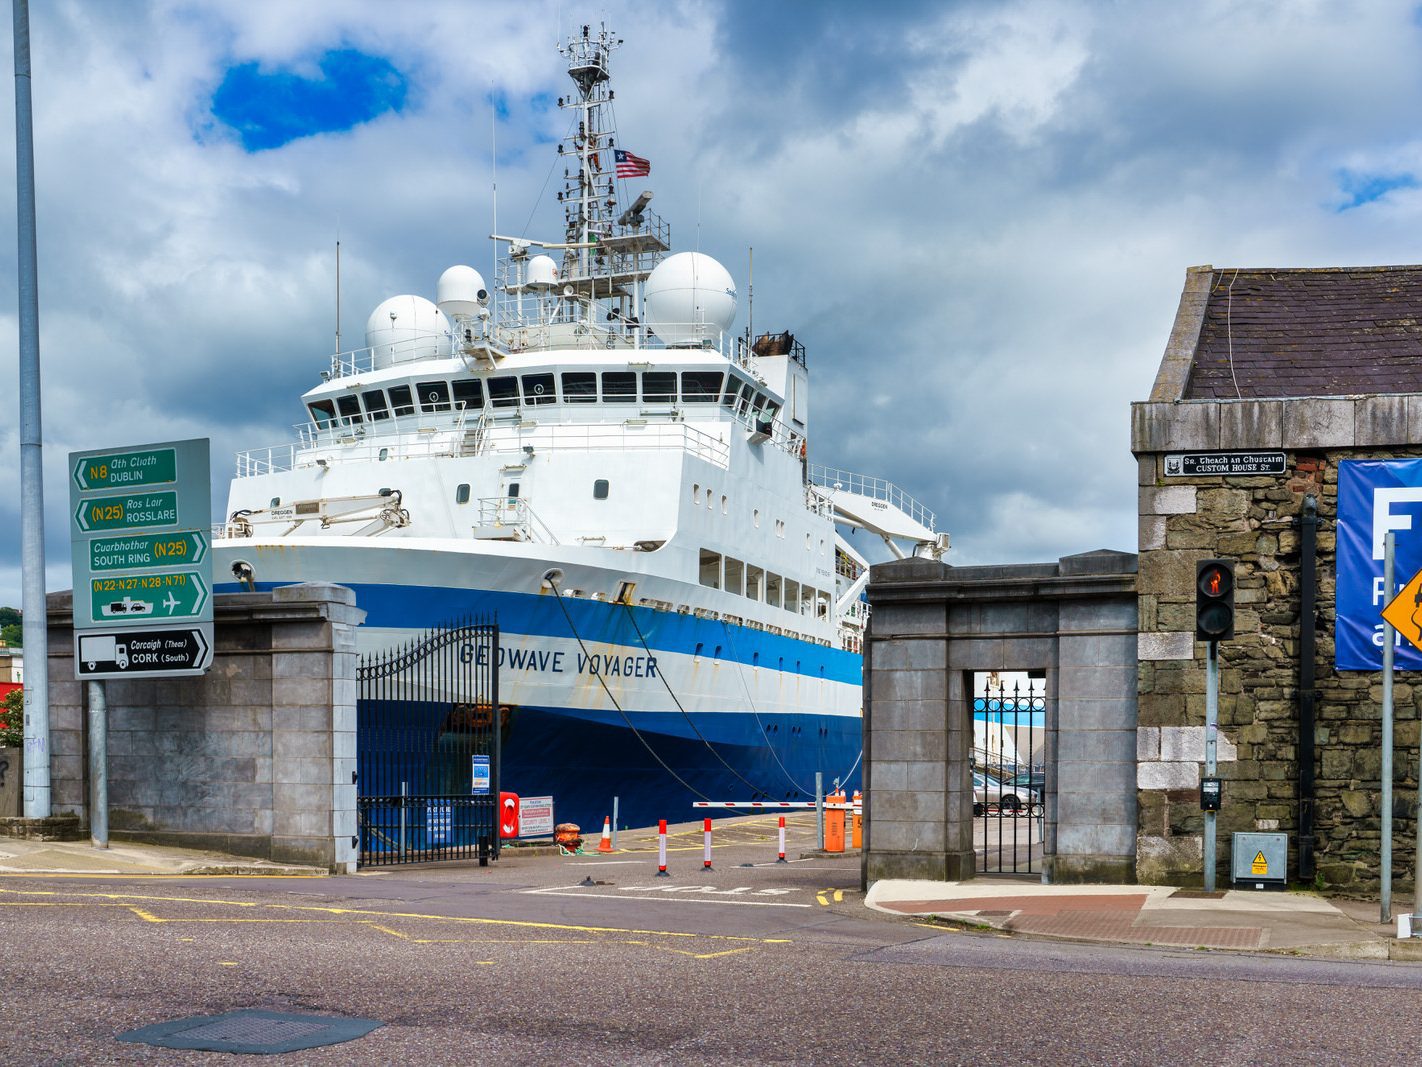 GEOWAVE VOYAGER LATER RENAMED EAGLE EXPLORER IMO 9381299 [AT CUSTOM HOUSE QUAY IN CORK JULY 2016] 002